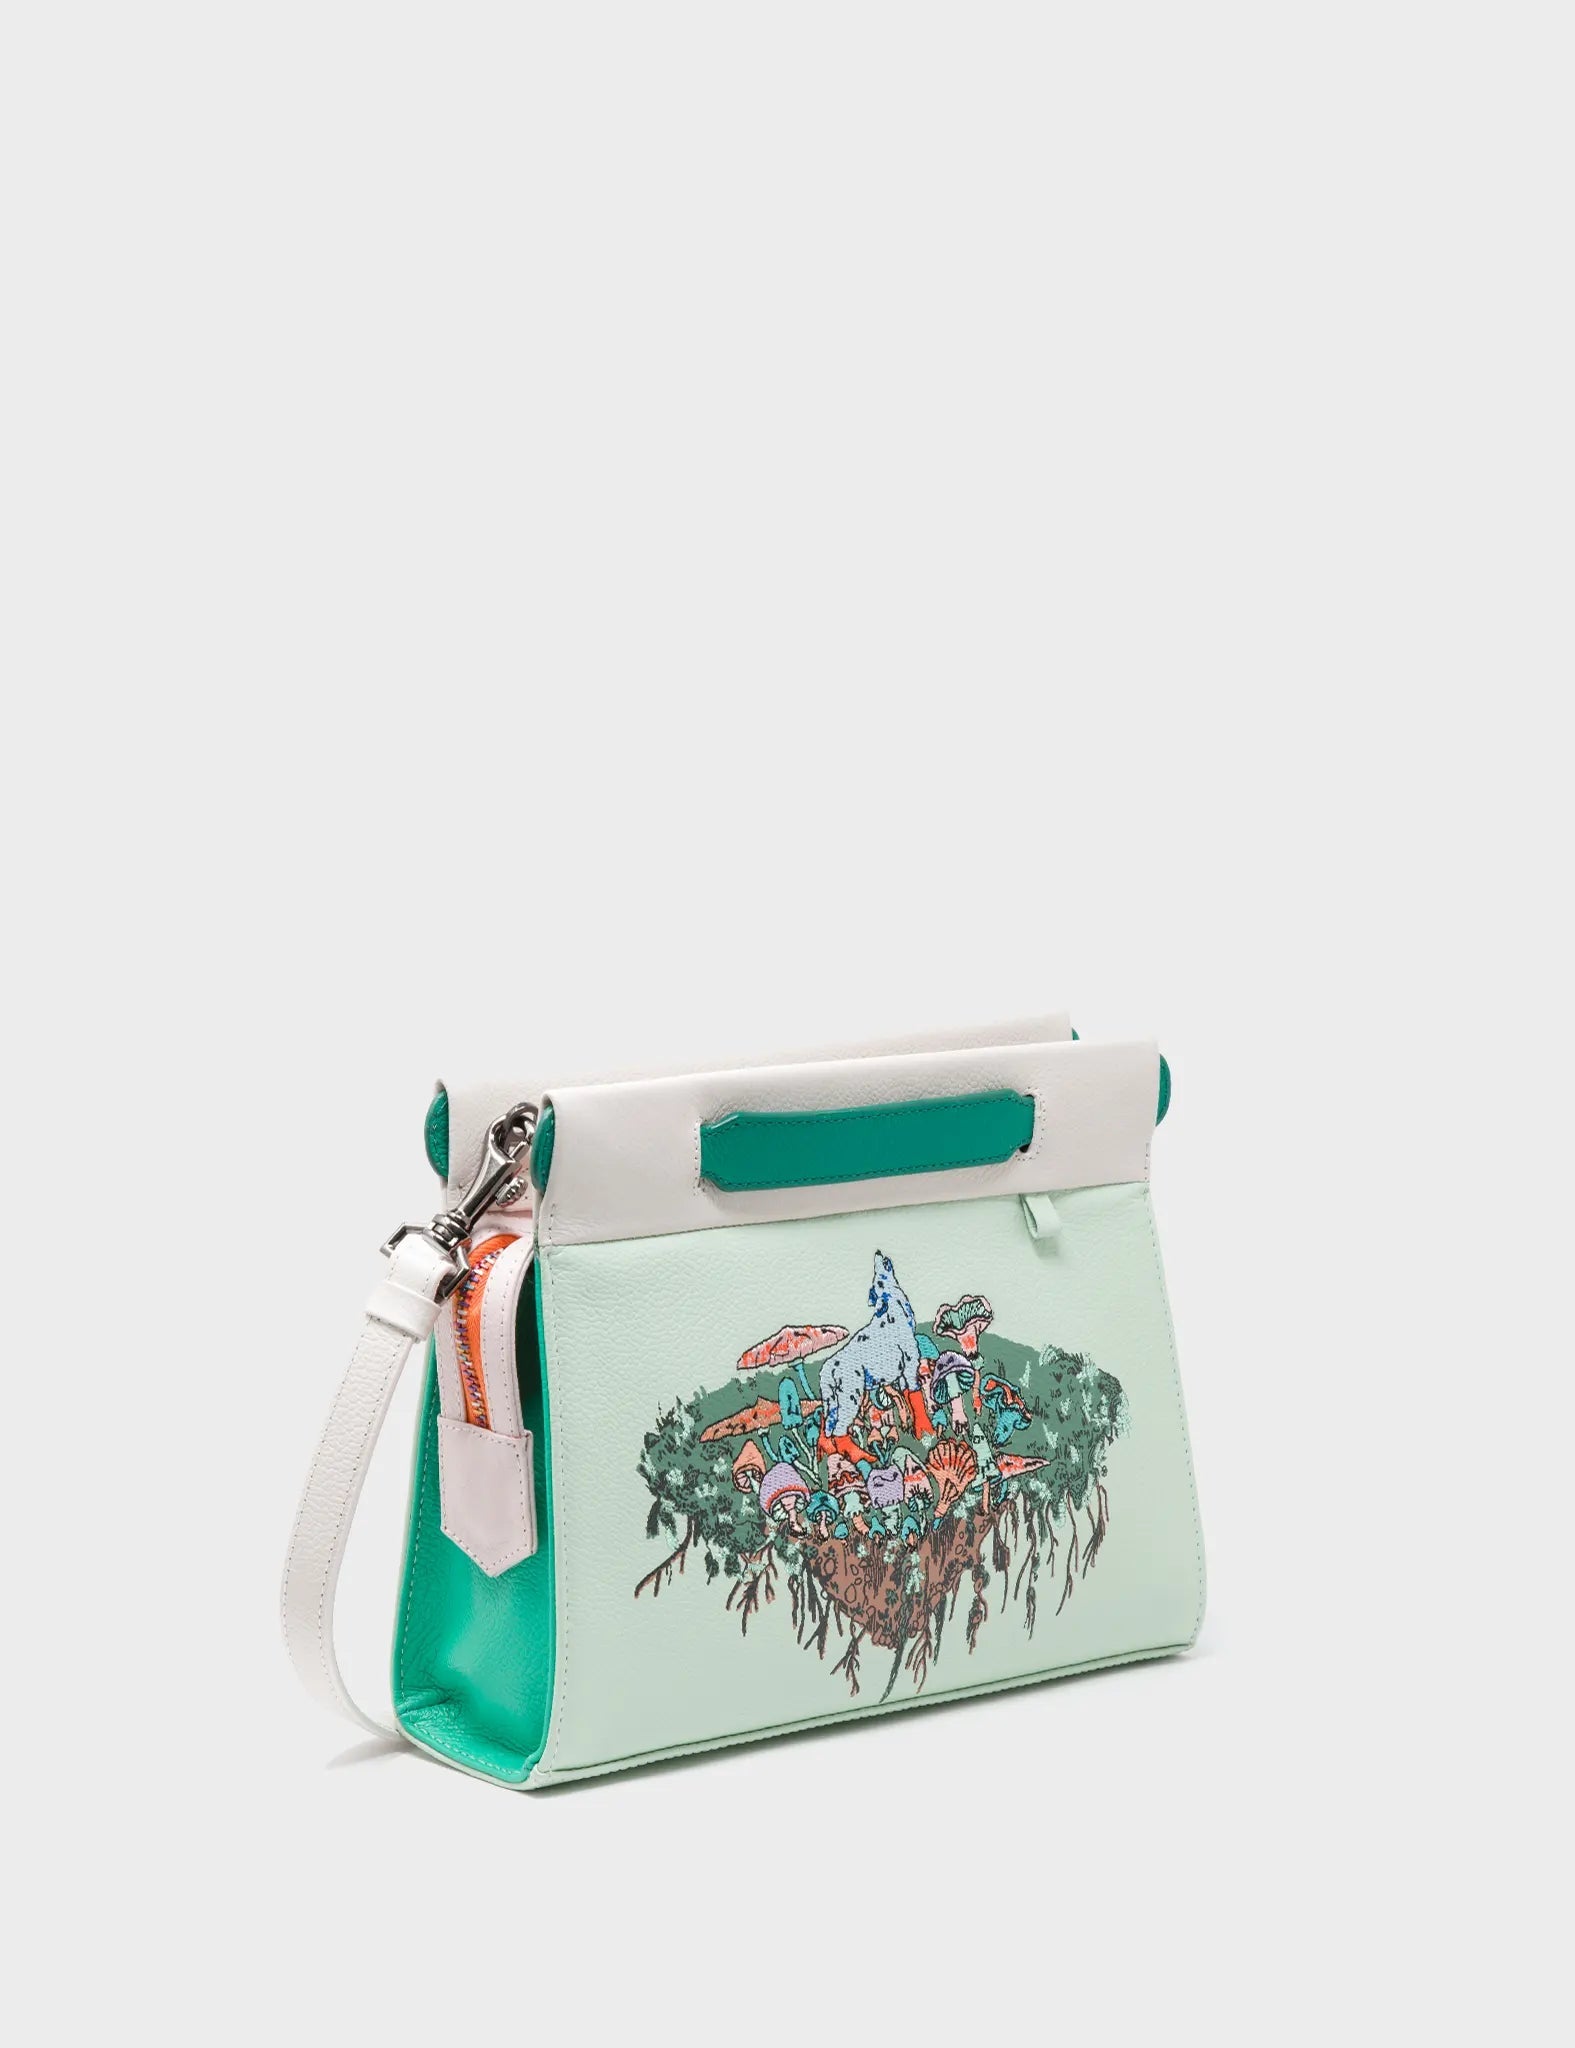 Crossbody Spray Green Leather Bag - Wolf and Fungi Embroidery